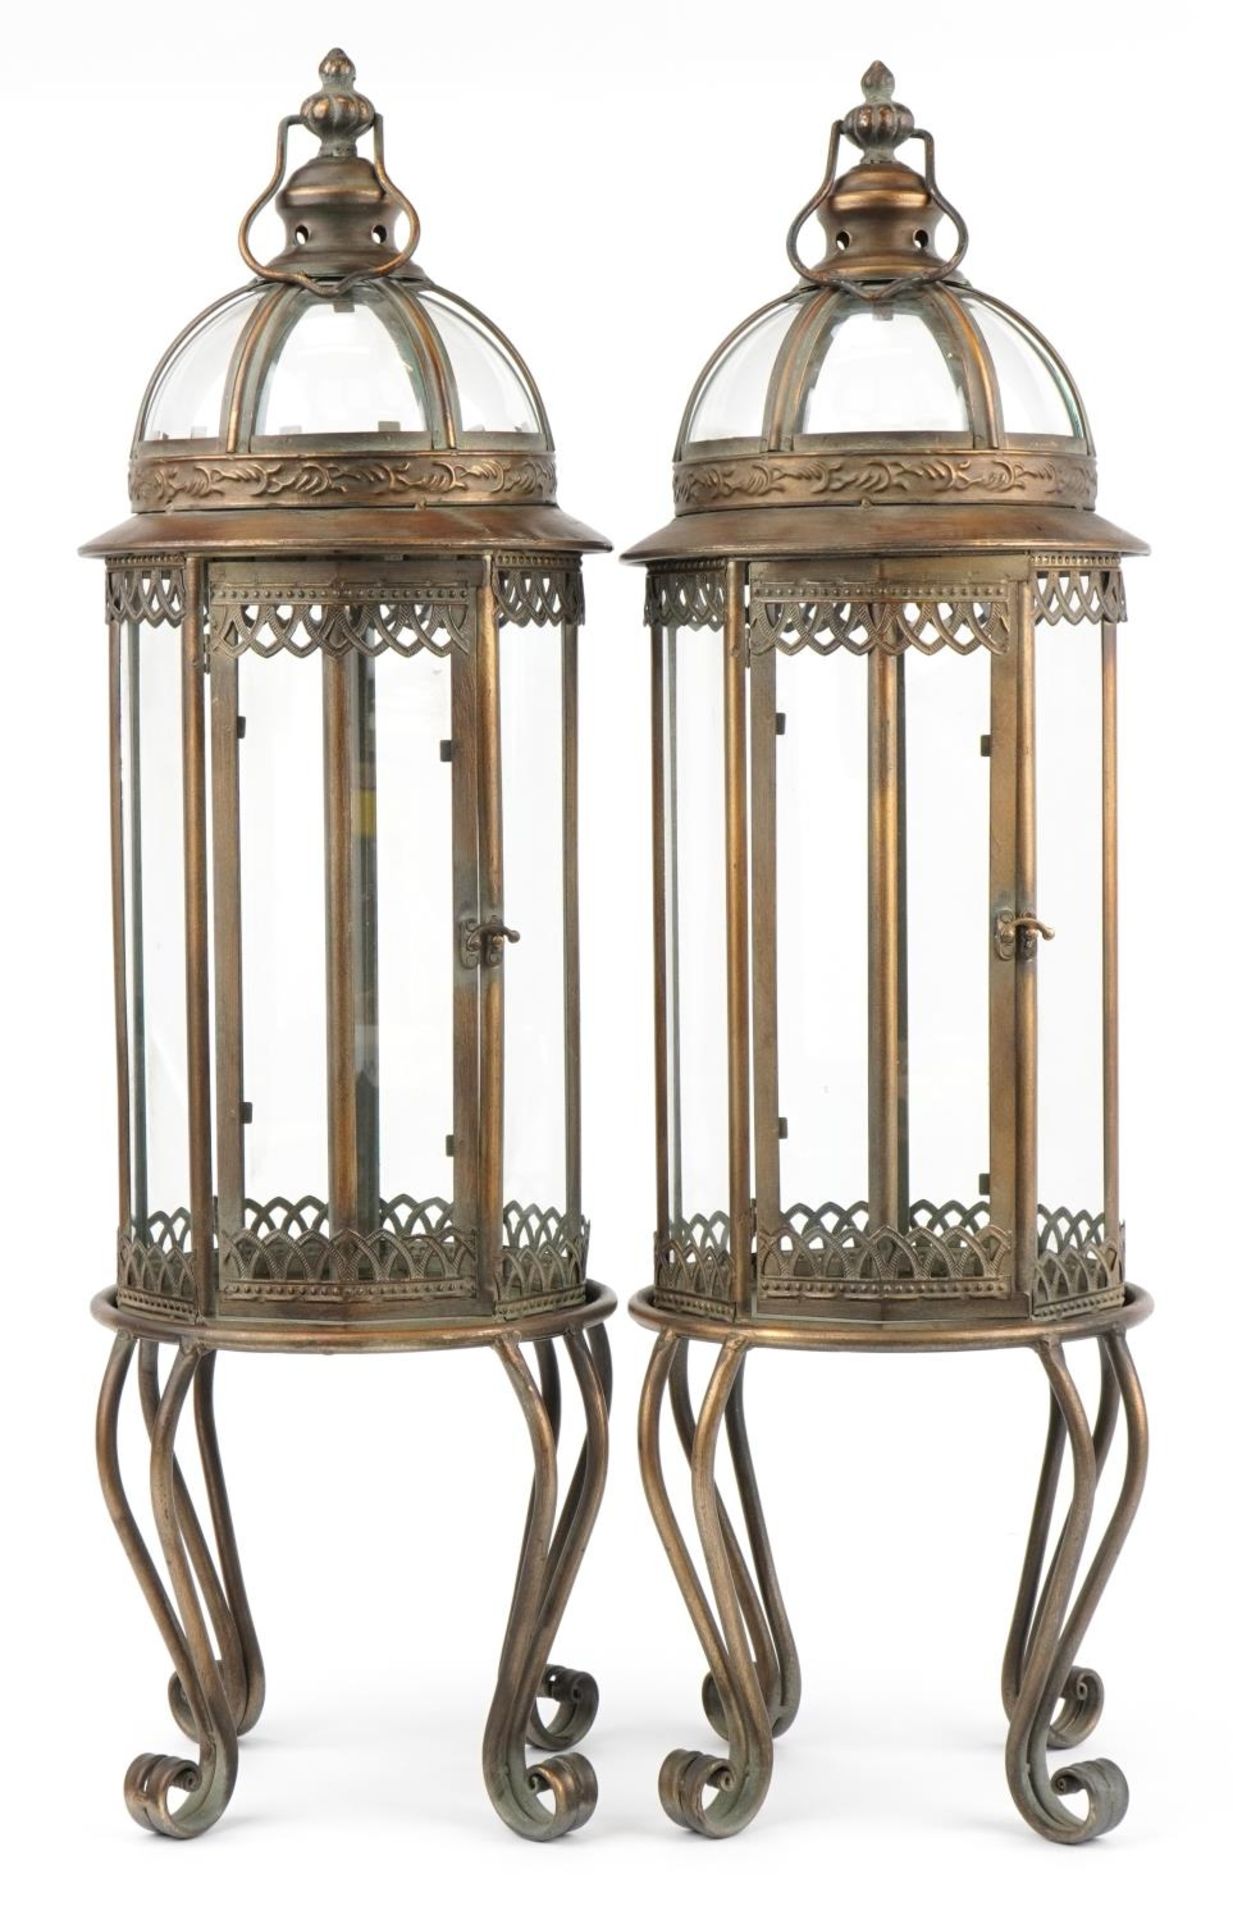 Pair of partially gilt and glazed lantern design candle holders, 82cm high - Image 2 of 3